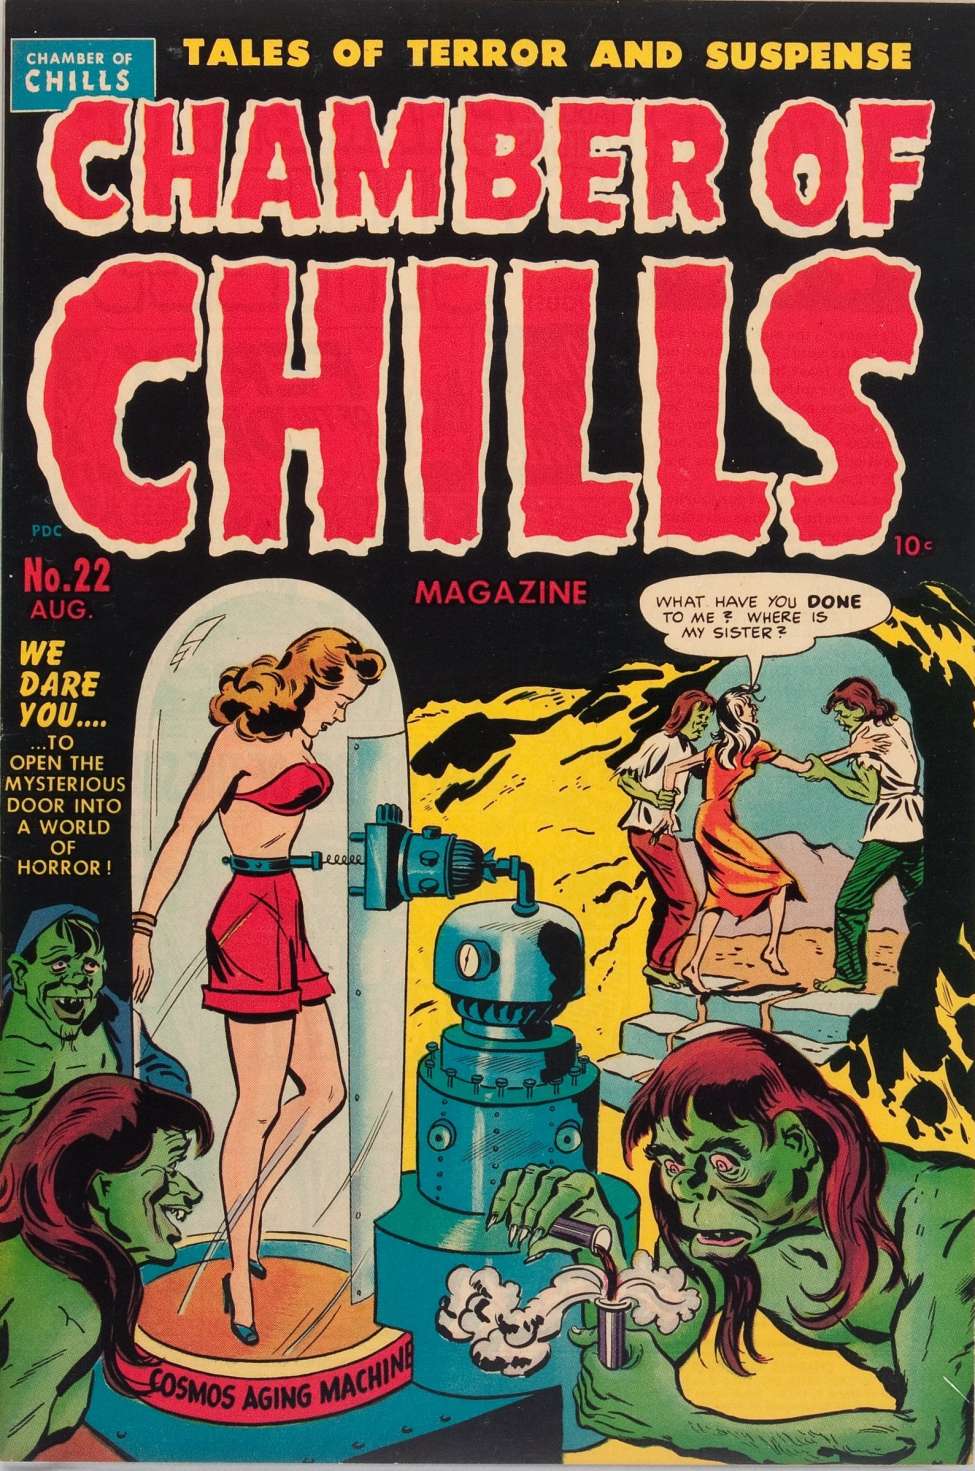 Comic Book Cover For Chamber of Chills 2 (22)